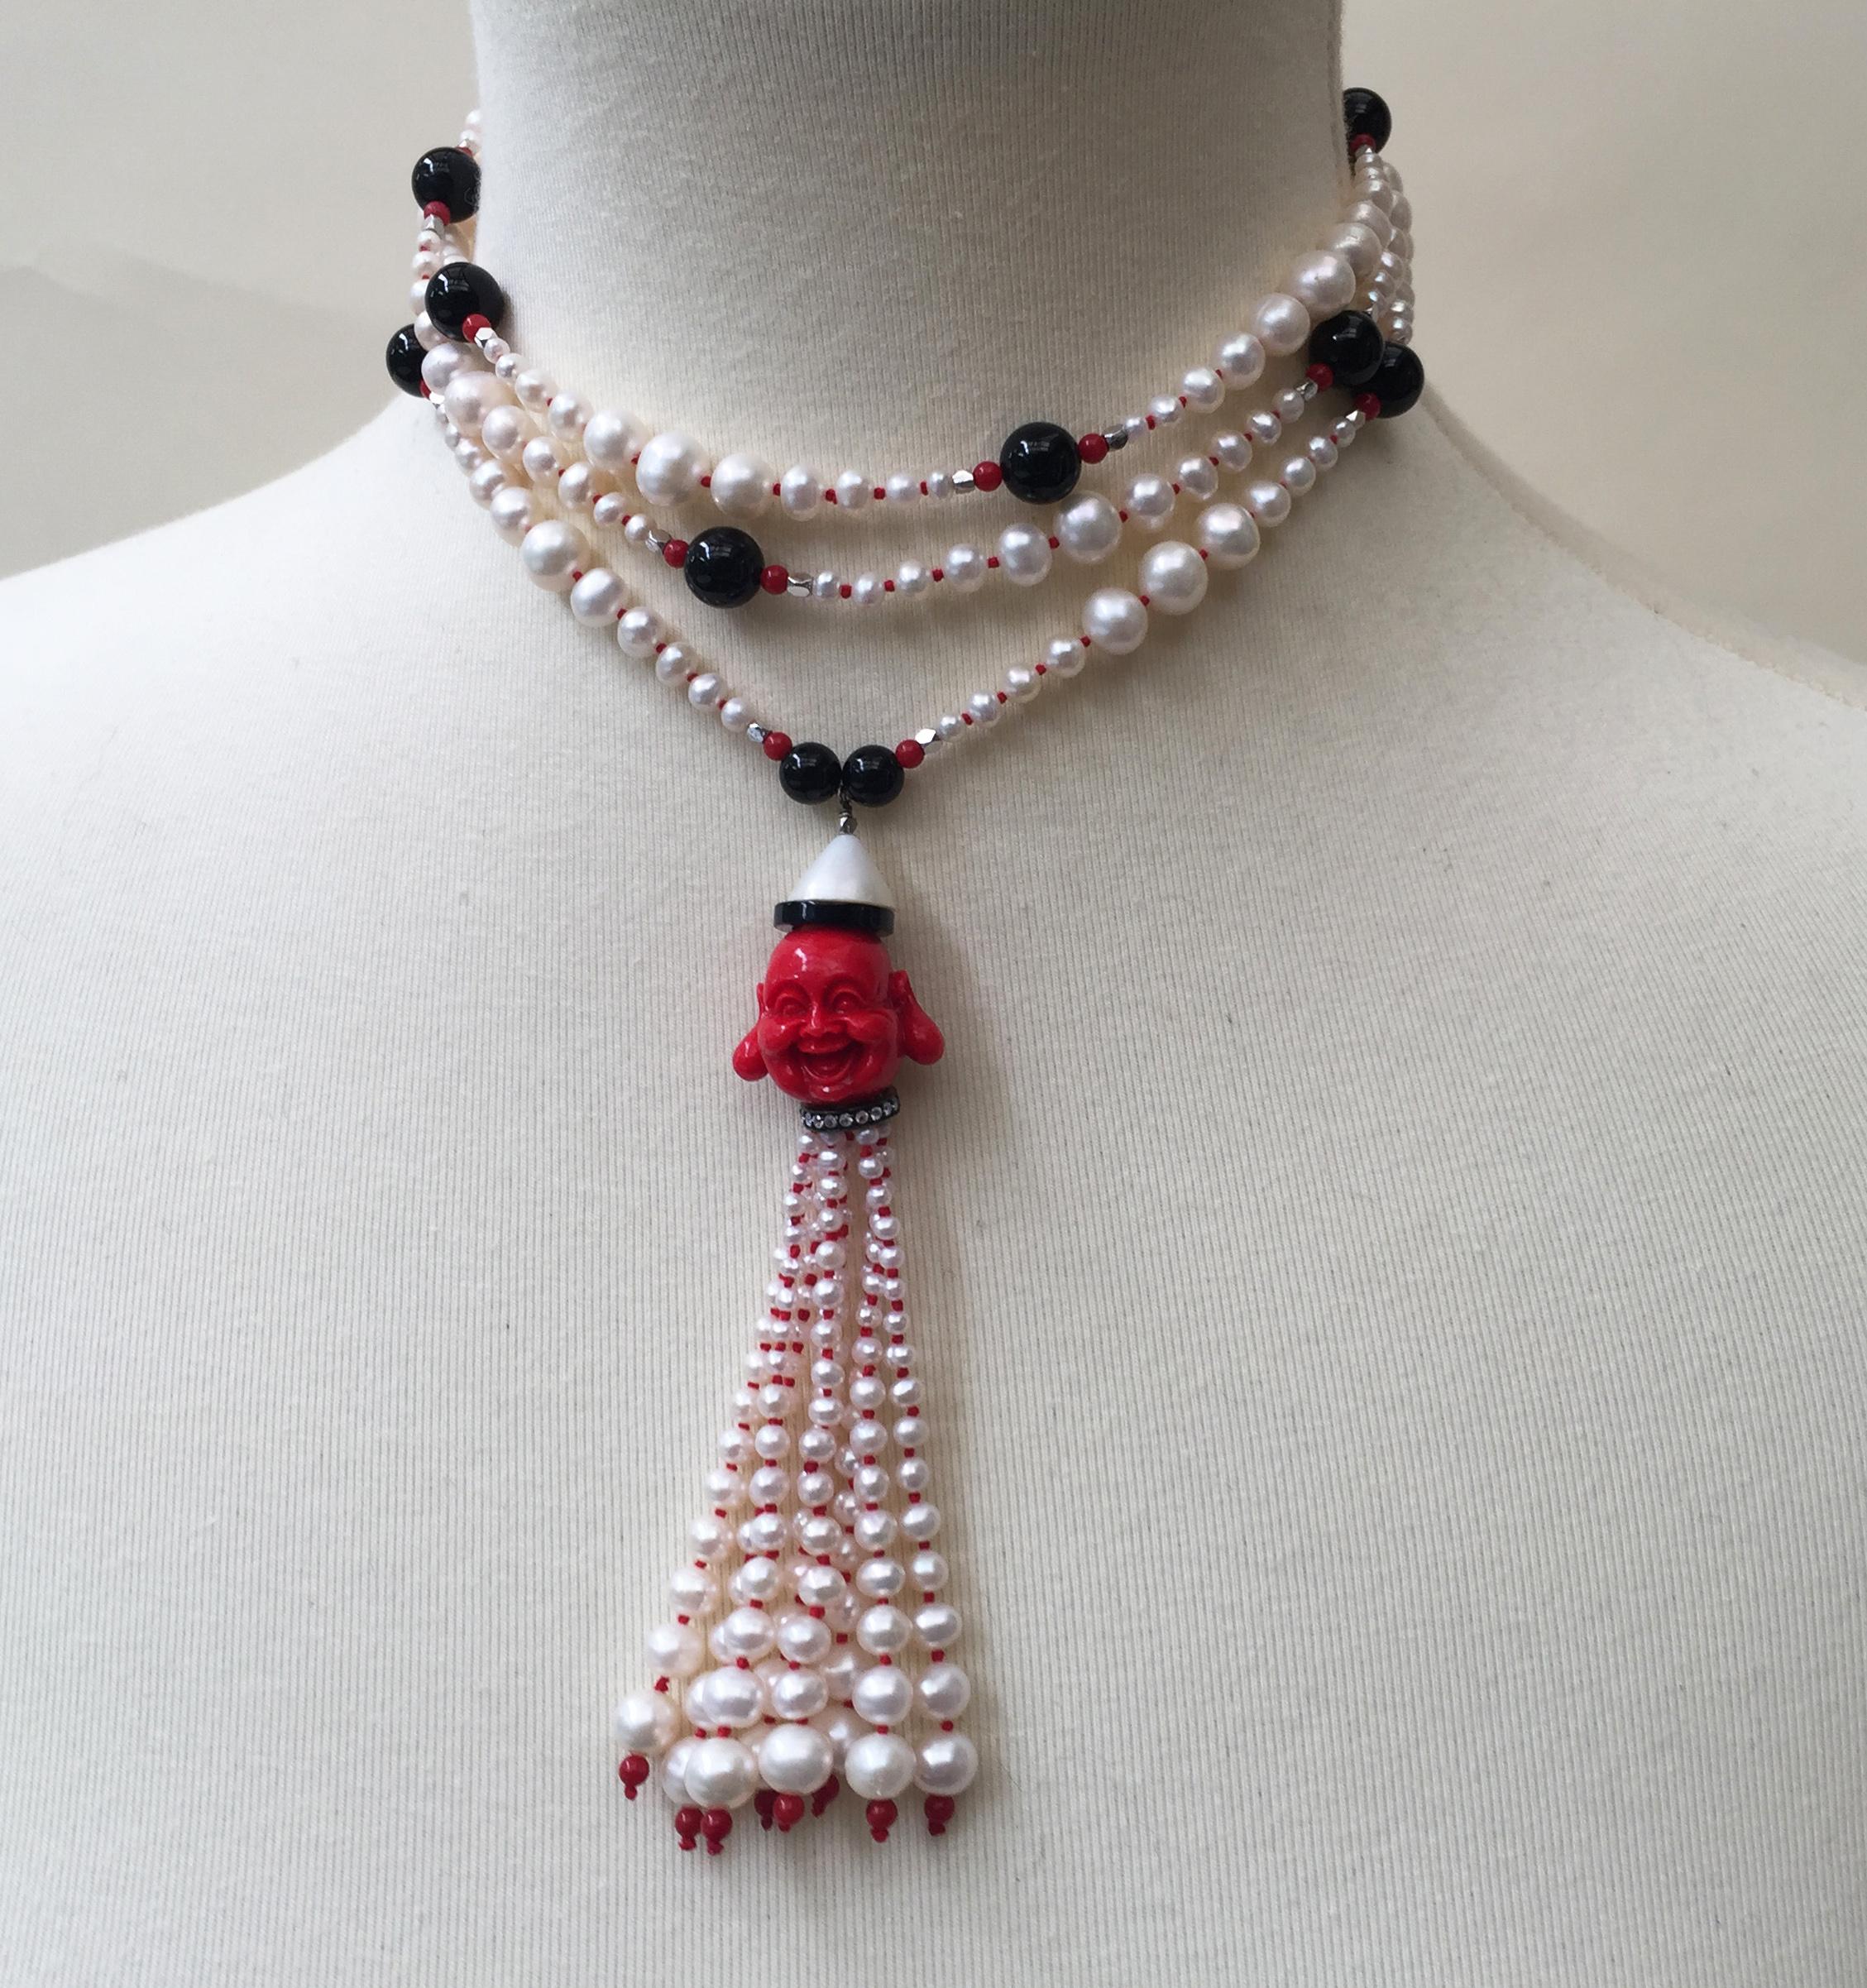 This sautoir necklace is composed of a long strand of graduated white pearls (2 mm-6 mm), coral, onyx, and sterling silver (rhodium plated) beads. At the center of the piece is a laughing coral Buddha bead, topped with onyx and a half white pearl.